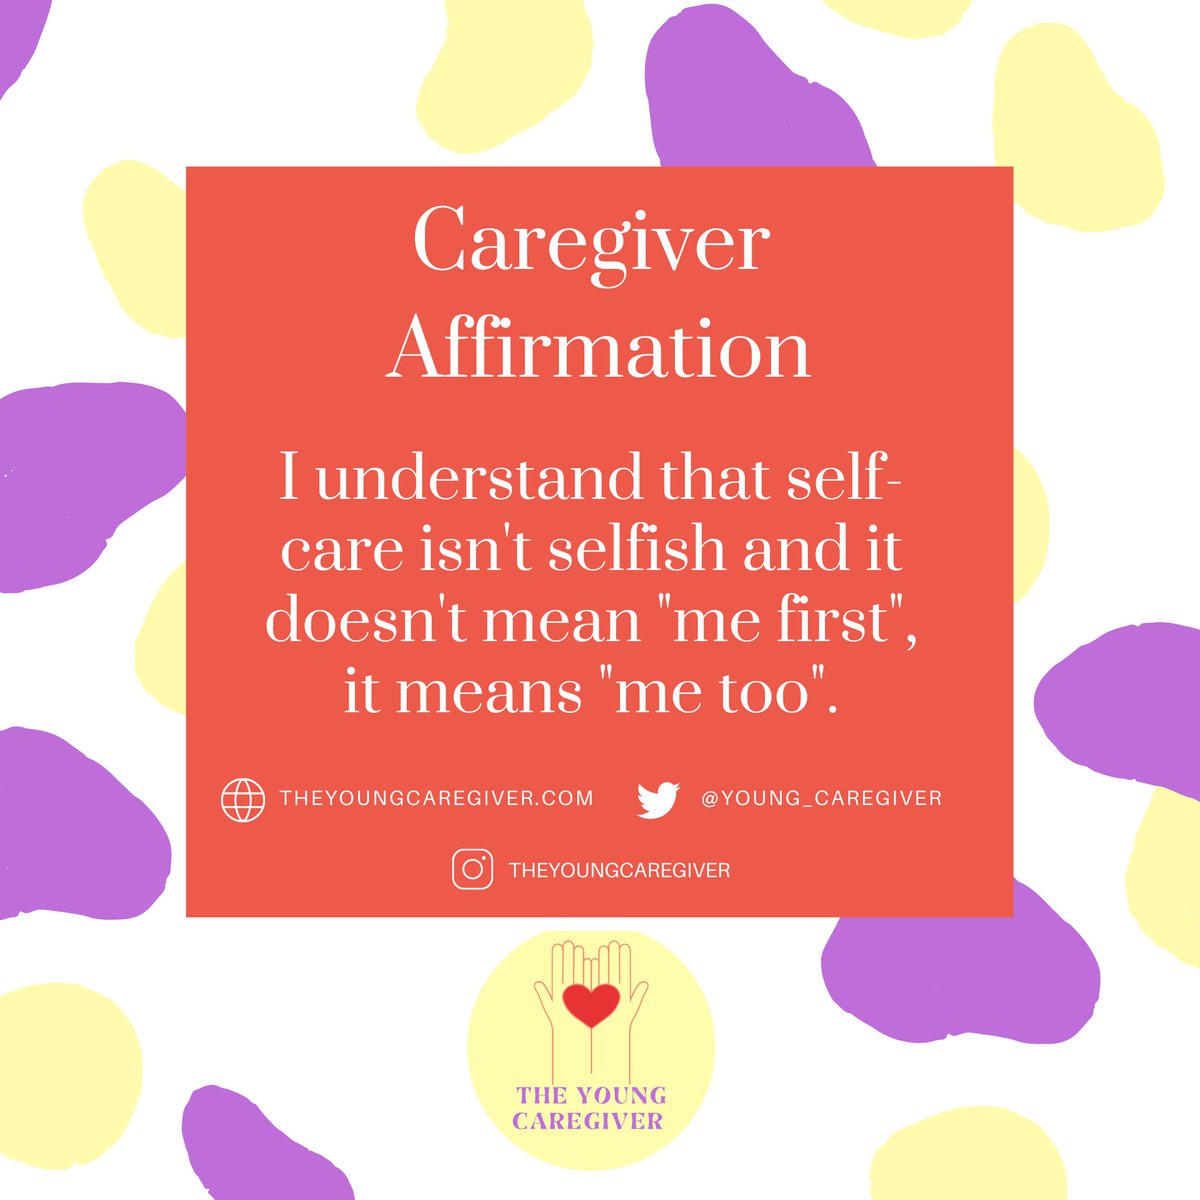 Our lives had been turned upside and I needed to include self care into my routine. My Dad understood it was my honor to take care of them but I needed breaks no matter how small. What's your self care activity? #theyoungcaregiver #caregiveraffirmations #selflove #selfcare